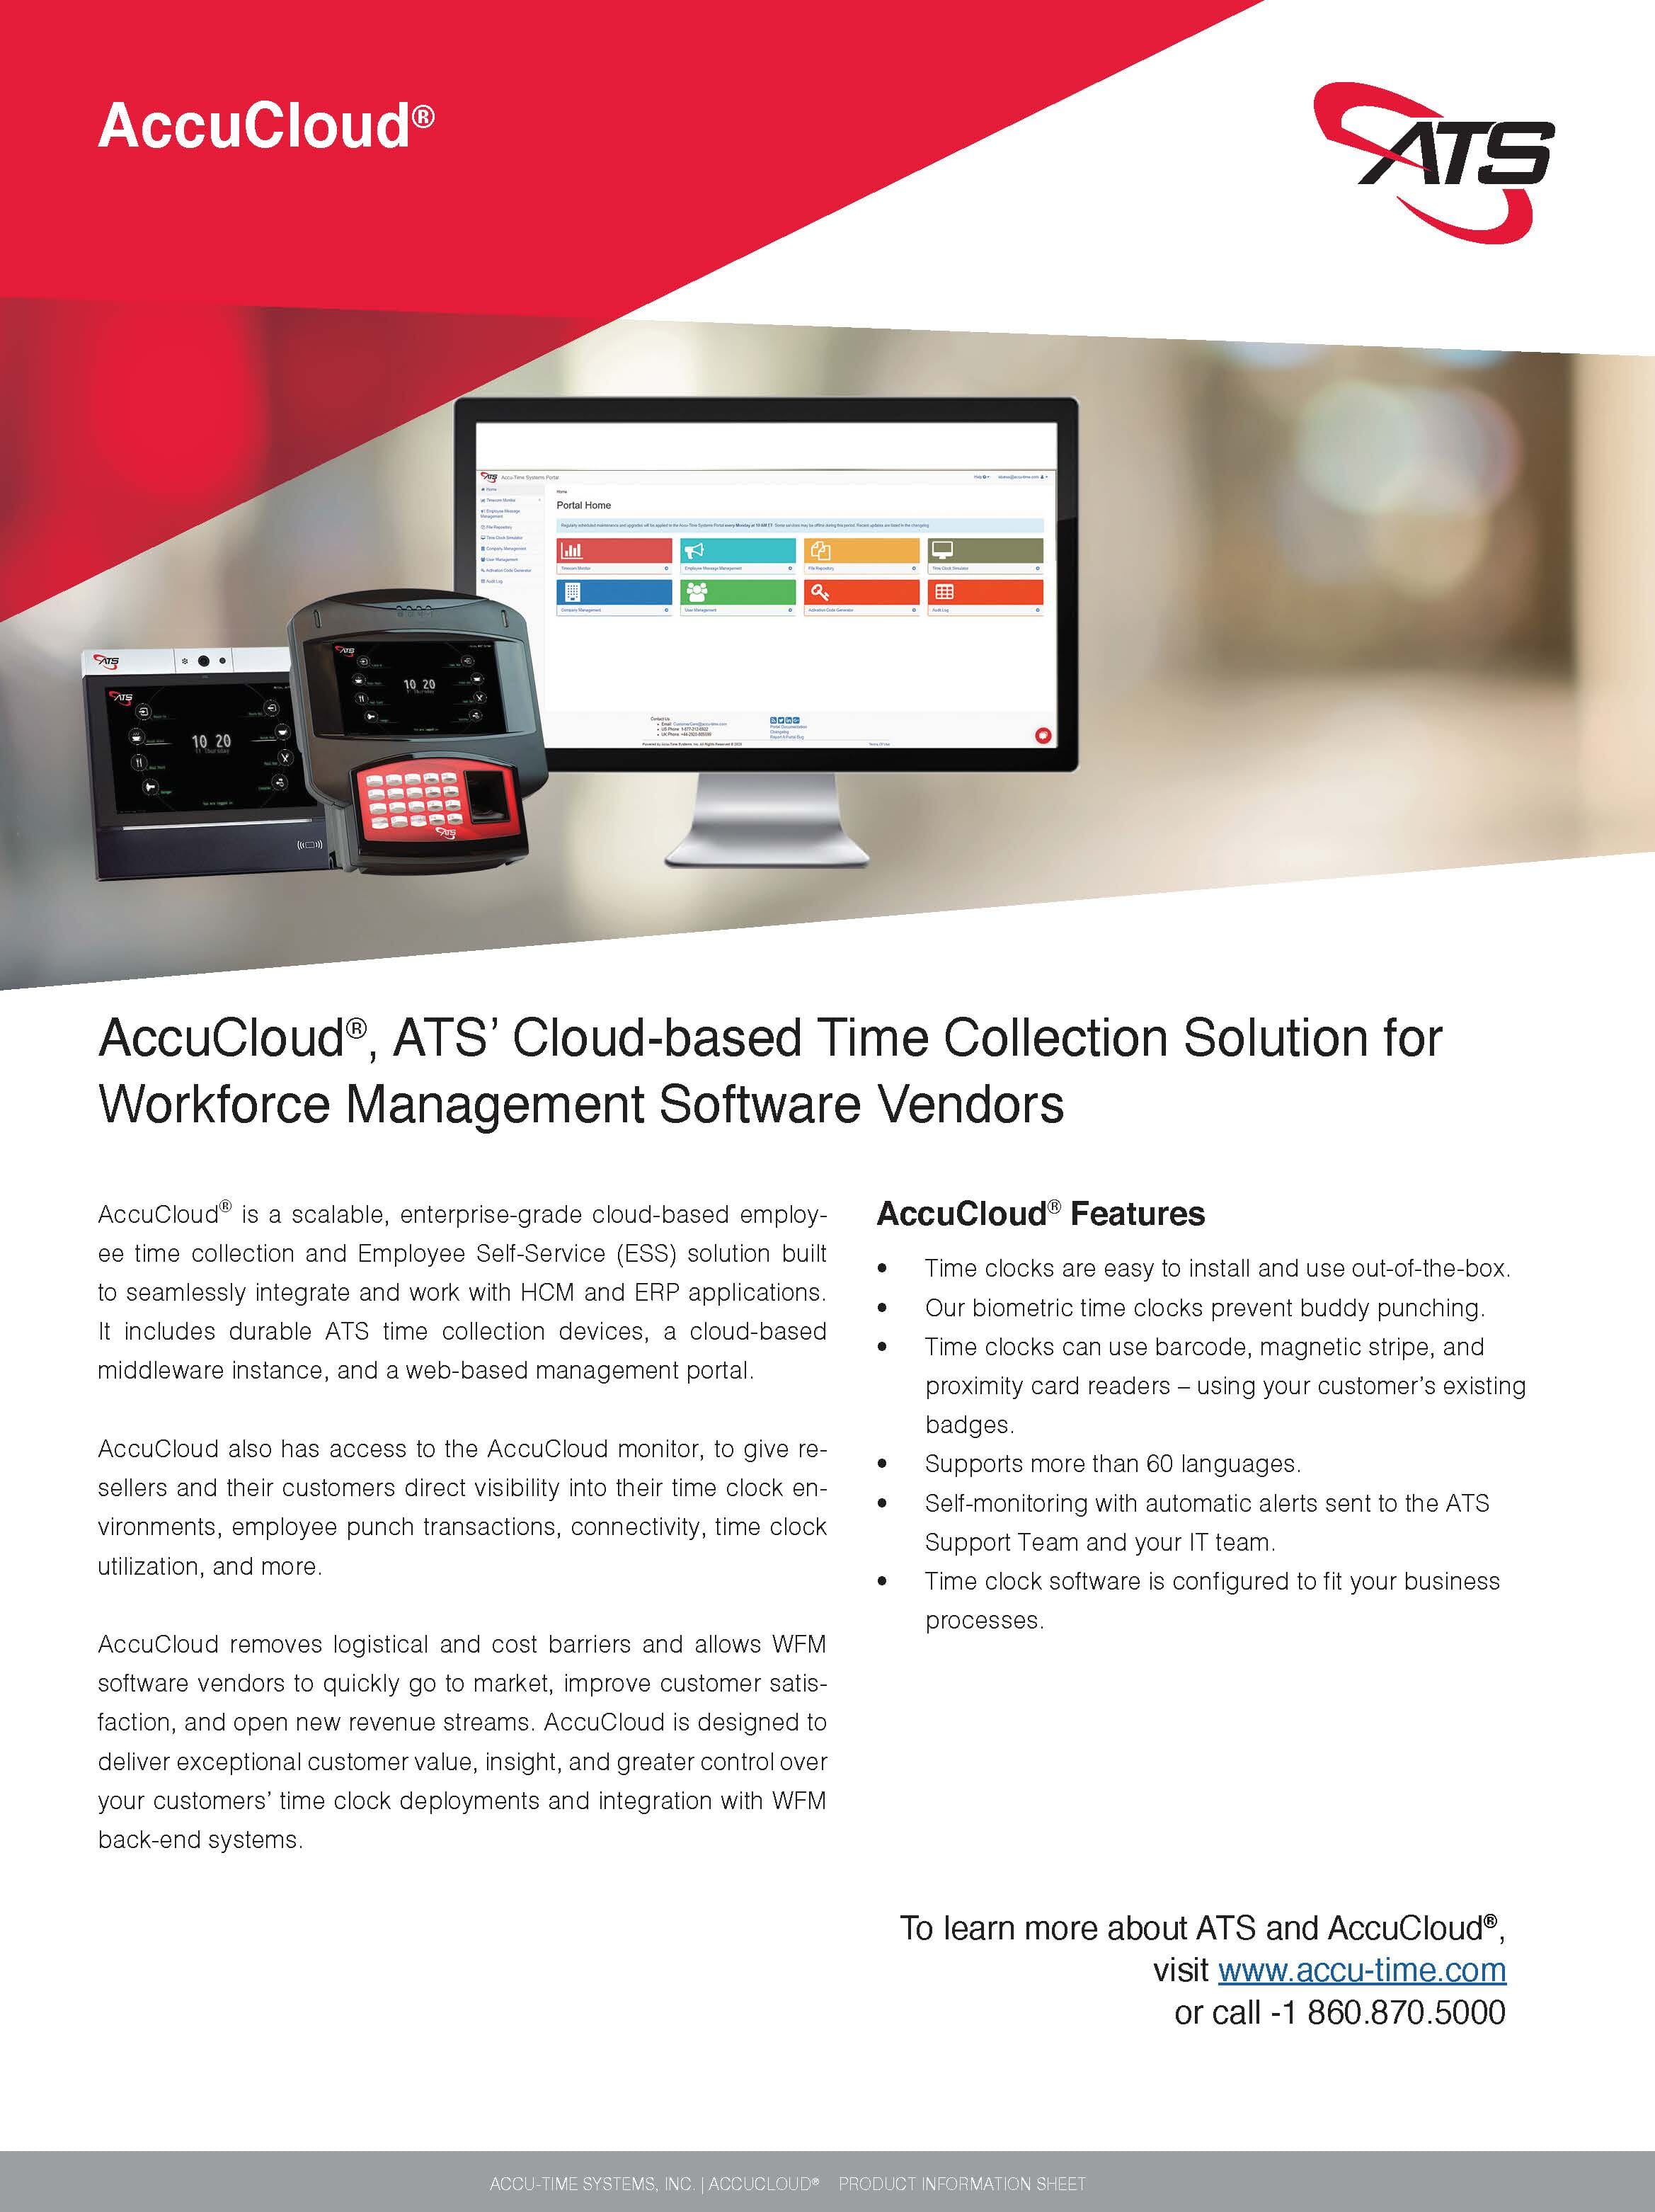 AccuCloud Solution for WFM vendors